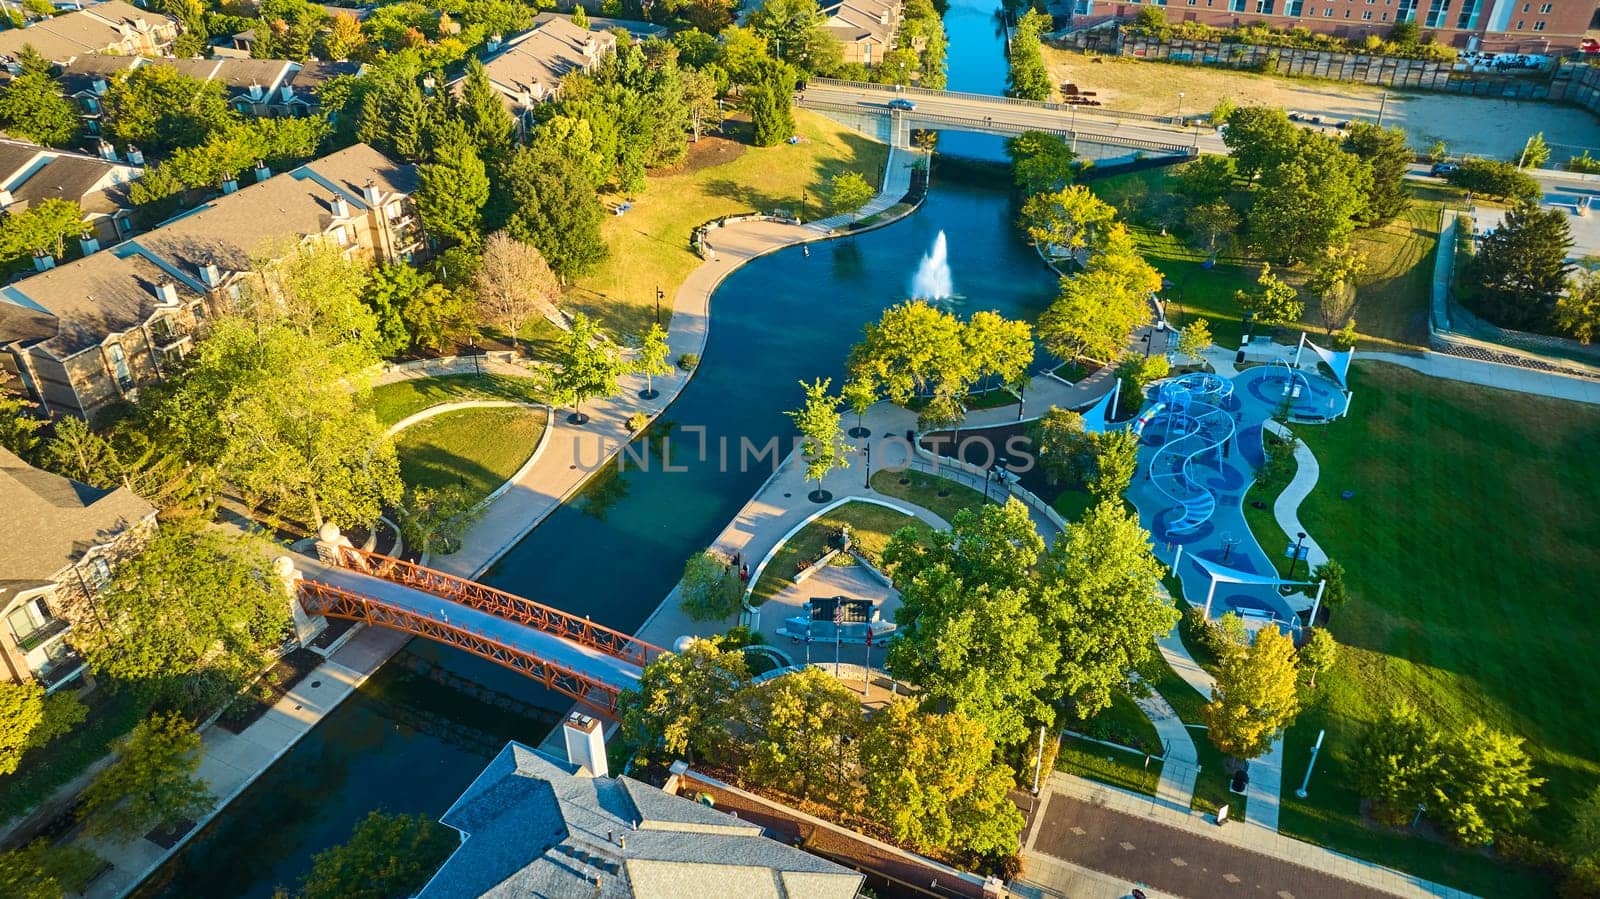 Aerial View of Suburban Park with Waterway and Playground at Sunset by njproductions